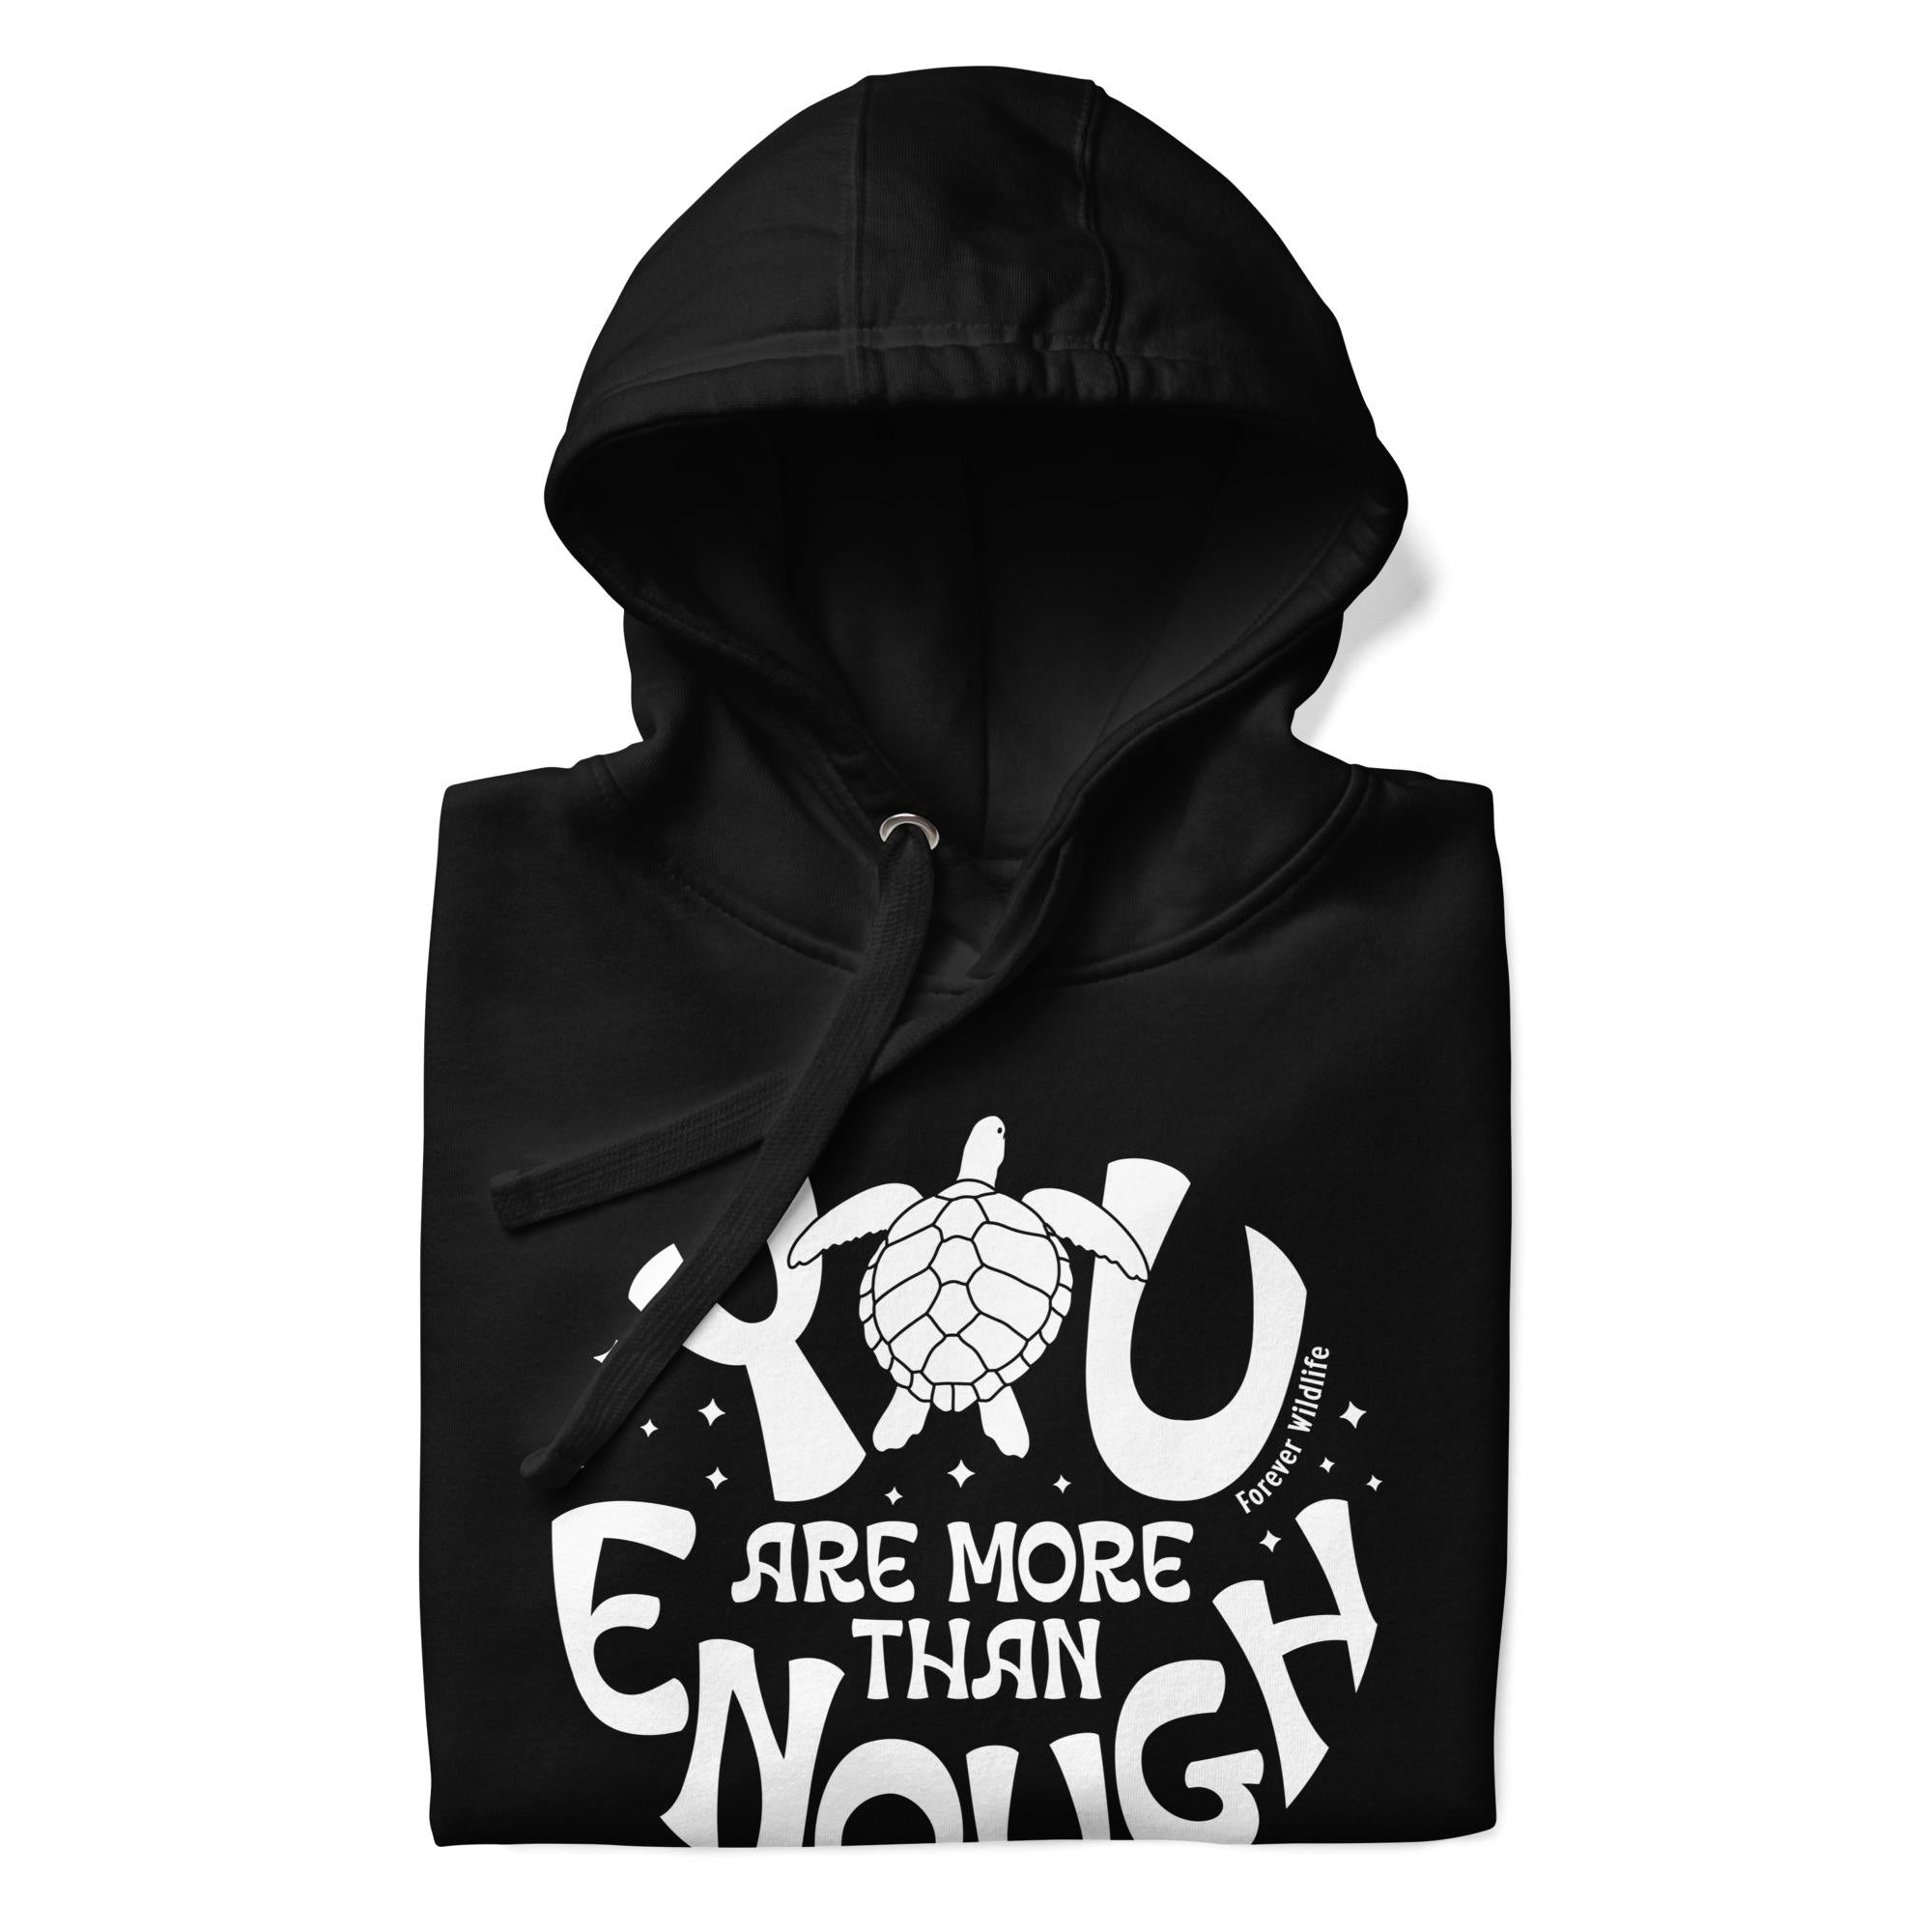 Sea Turtle Hoodie in Black – Premium Wildlife Animal Inspirational Hoodie Design with YOu Are More Than Enough text, part of Wildlife Hoodies & Clothing from Forever Wildlife